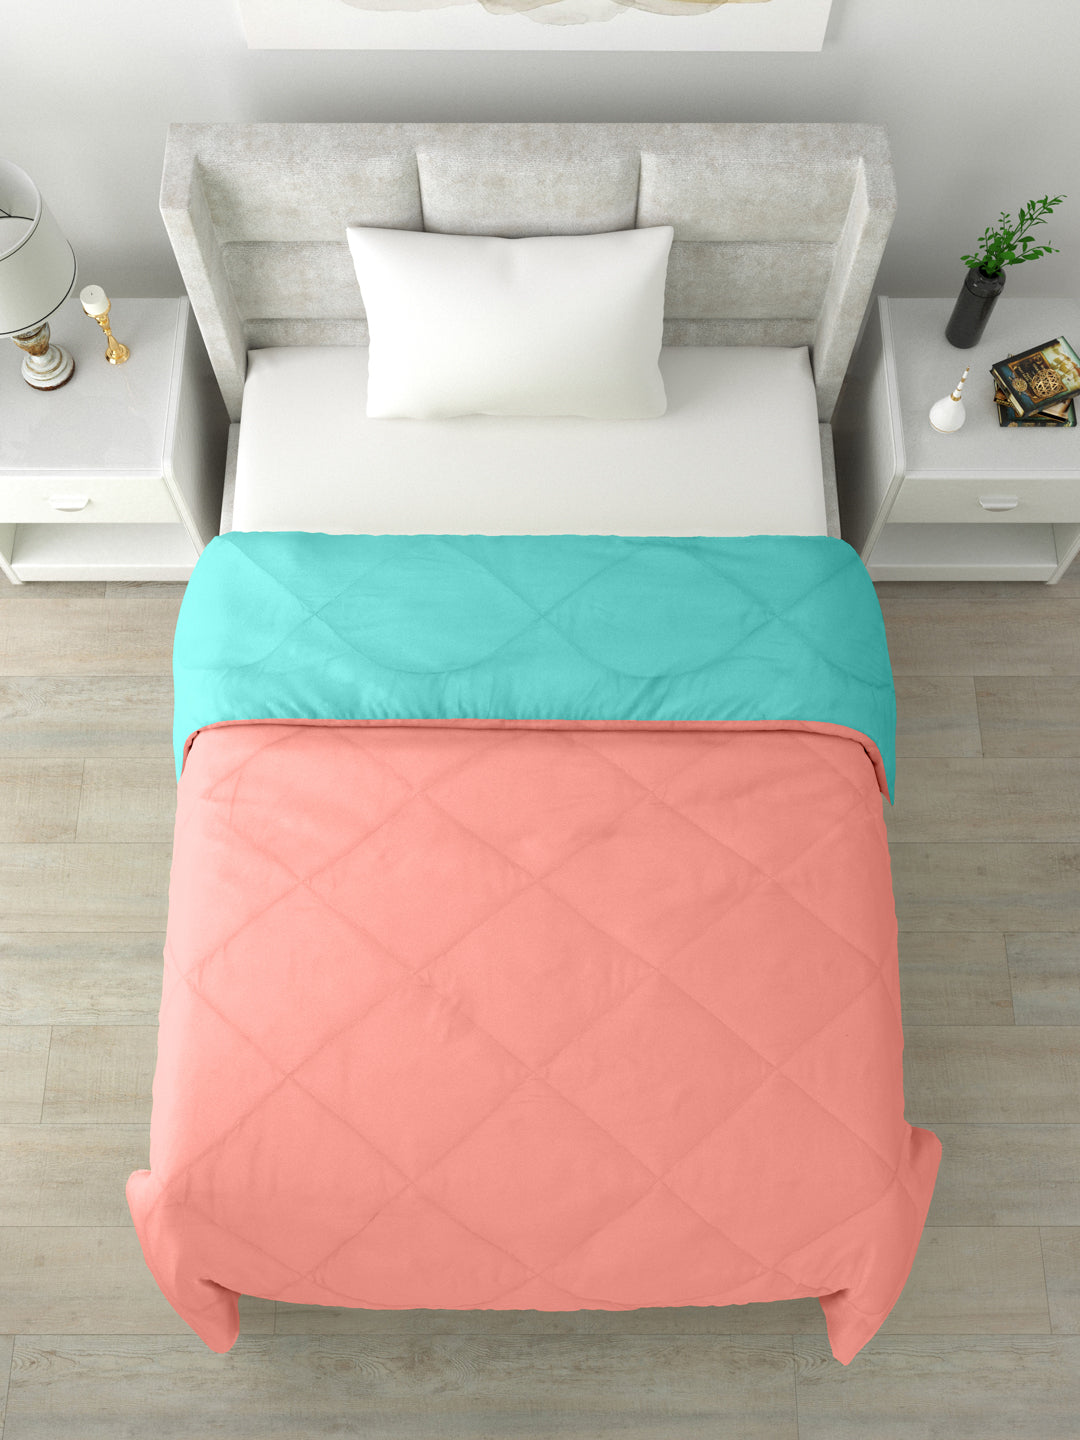 Reversible Single Bed Comforter 200 GSM 60x90 Inches (Candy Peach & Sea Green)